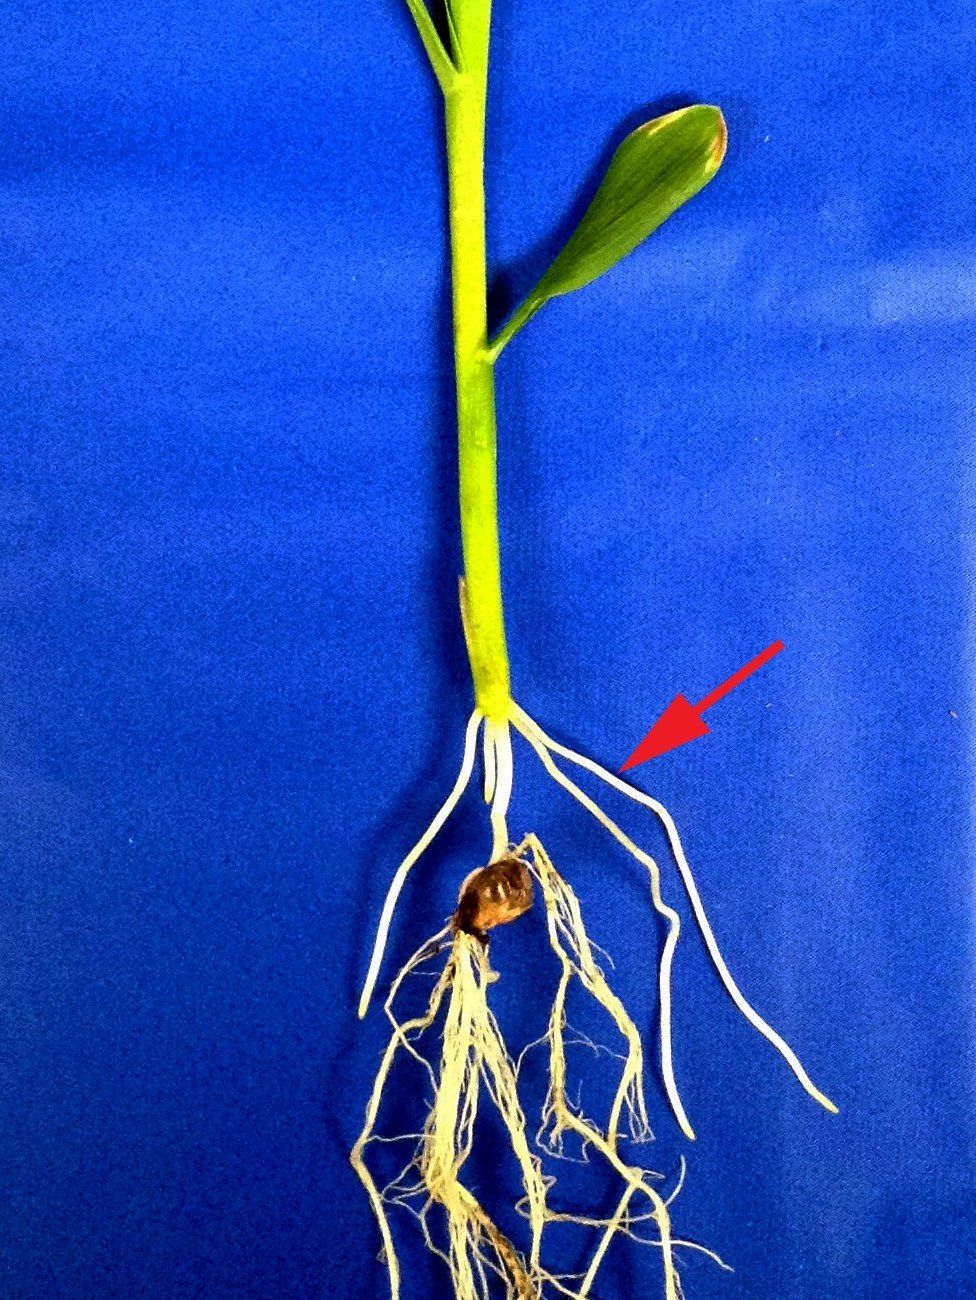 Excavated maize seedling showing crown roots (Image: Jose Sabastian)